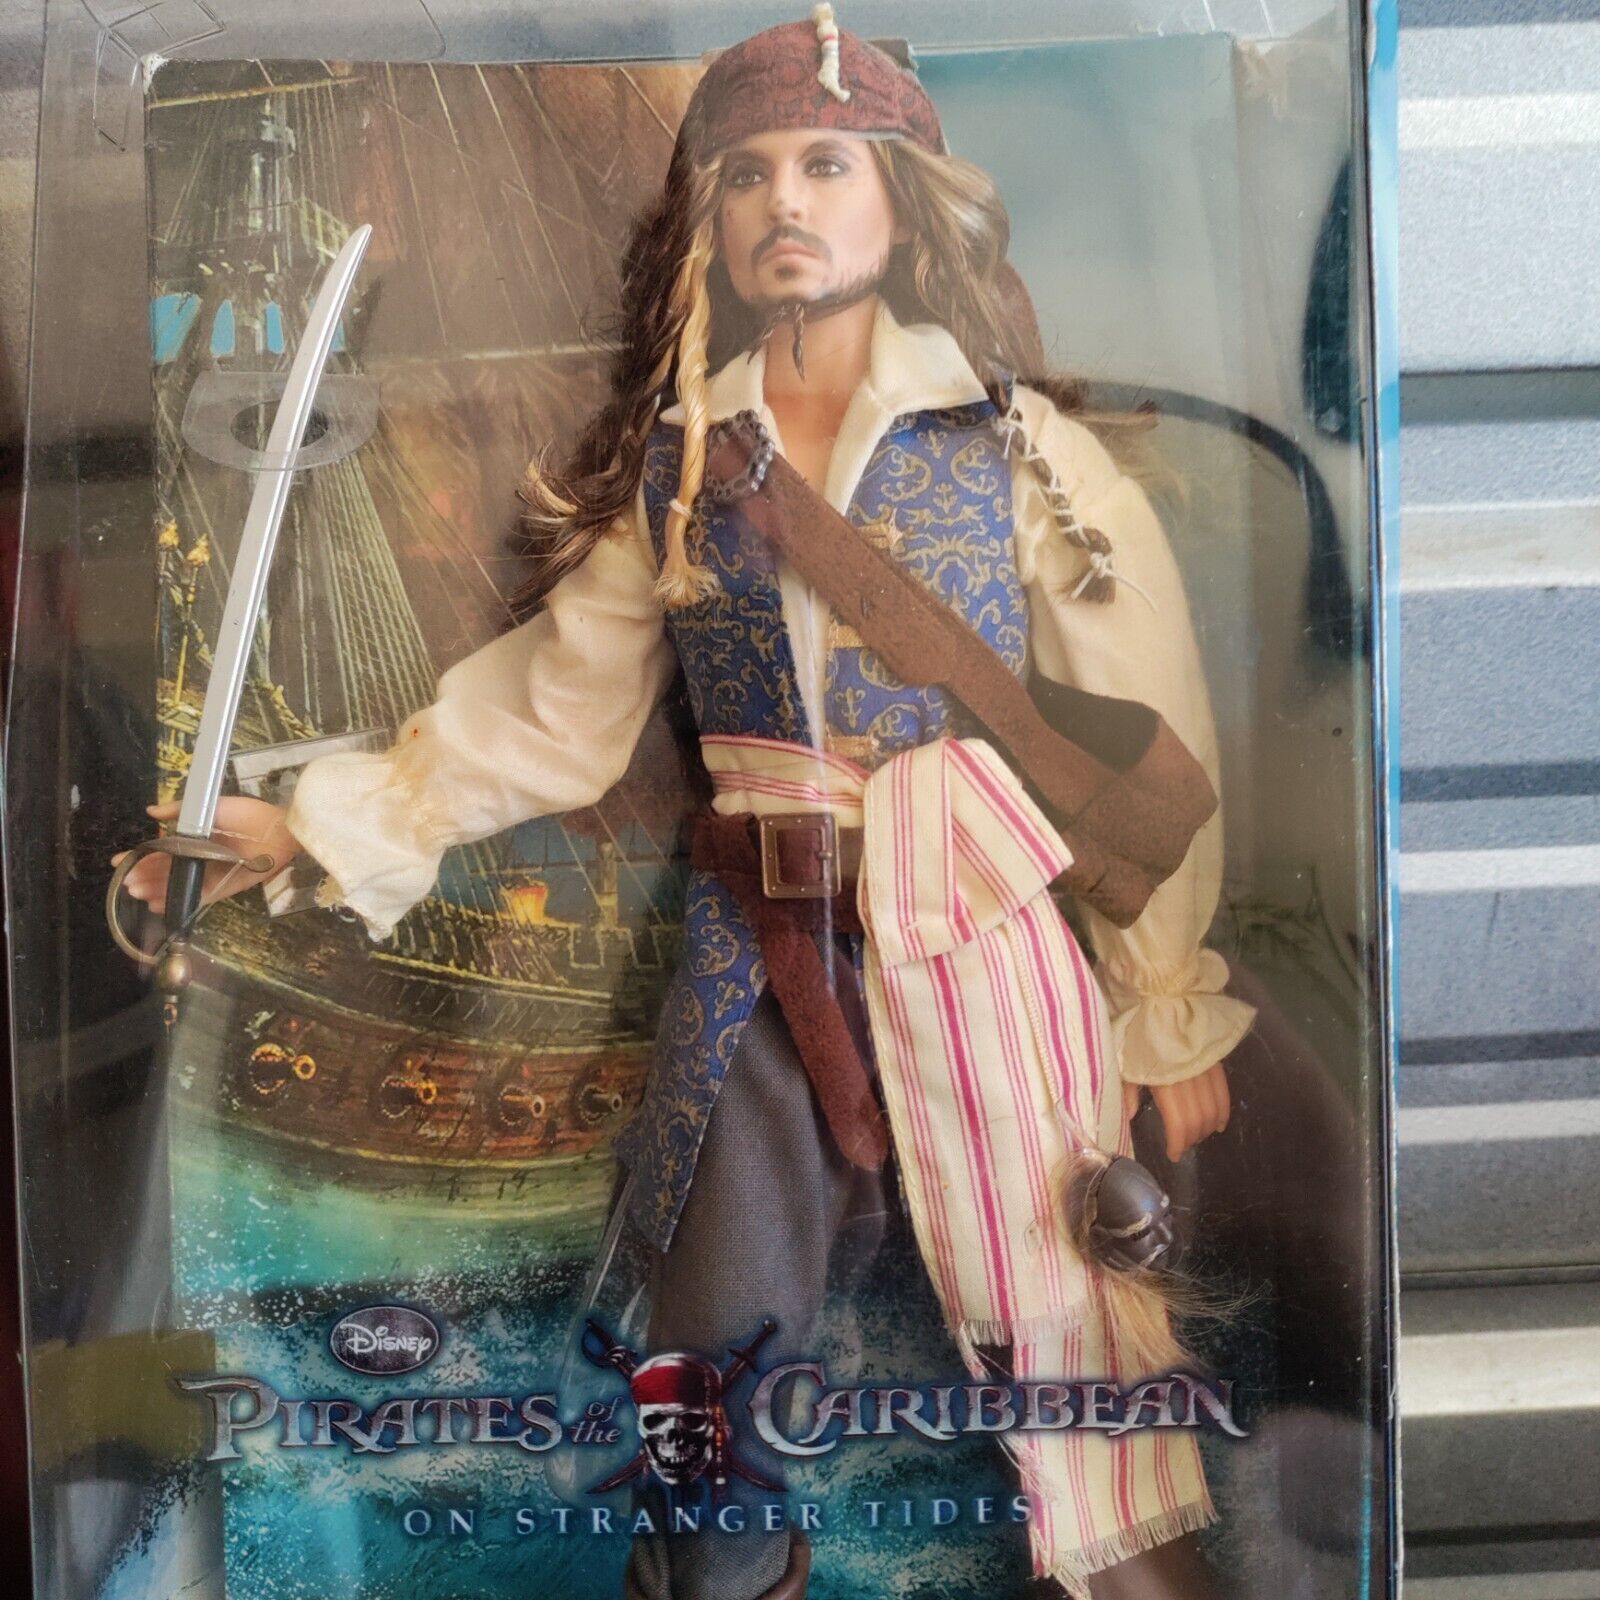  Pirates Of The Caribbean Captain Jack Sparrow Barbie doll. Still in the box .